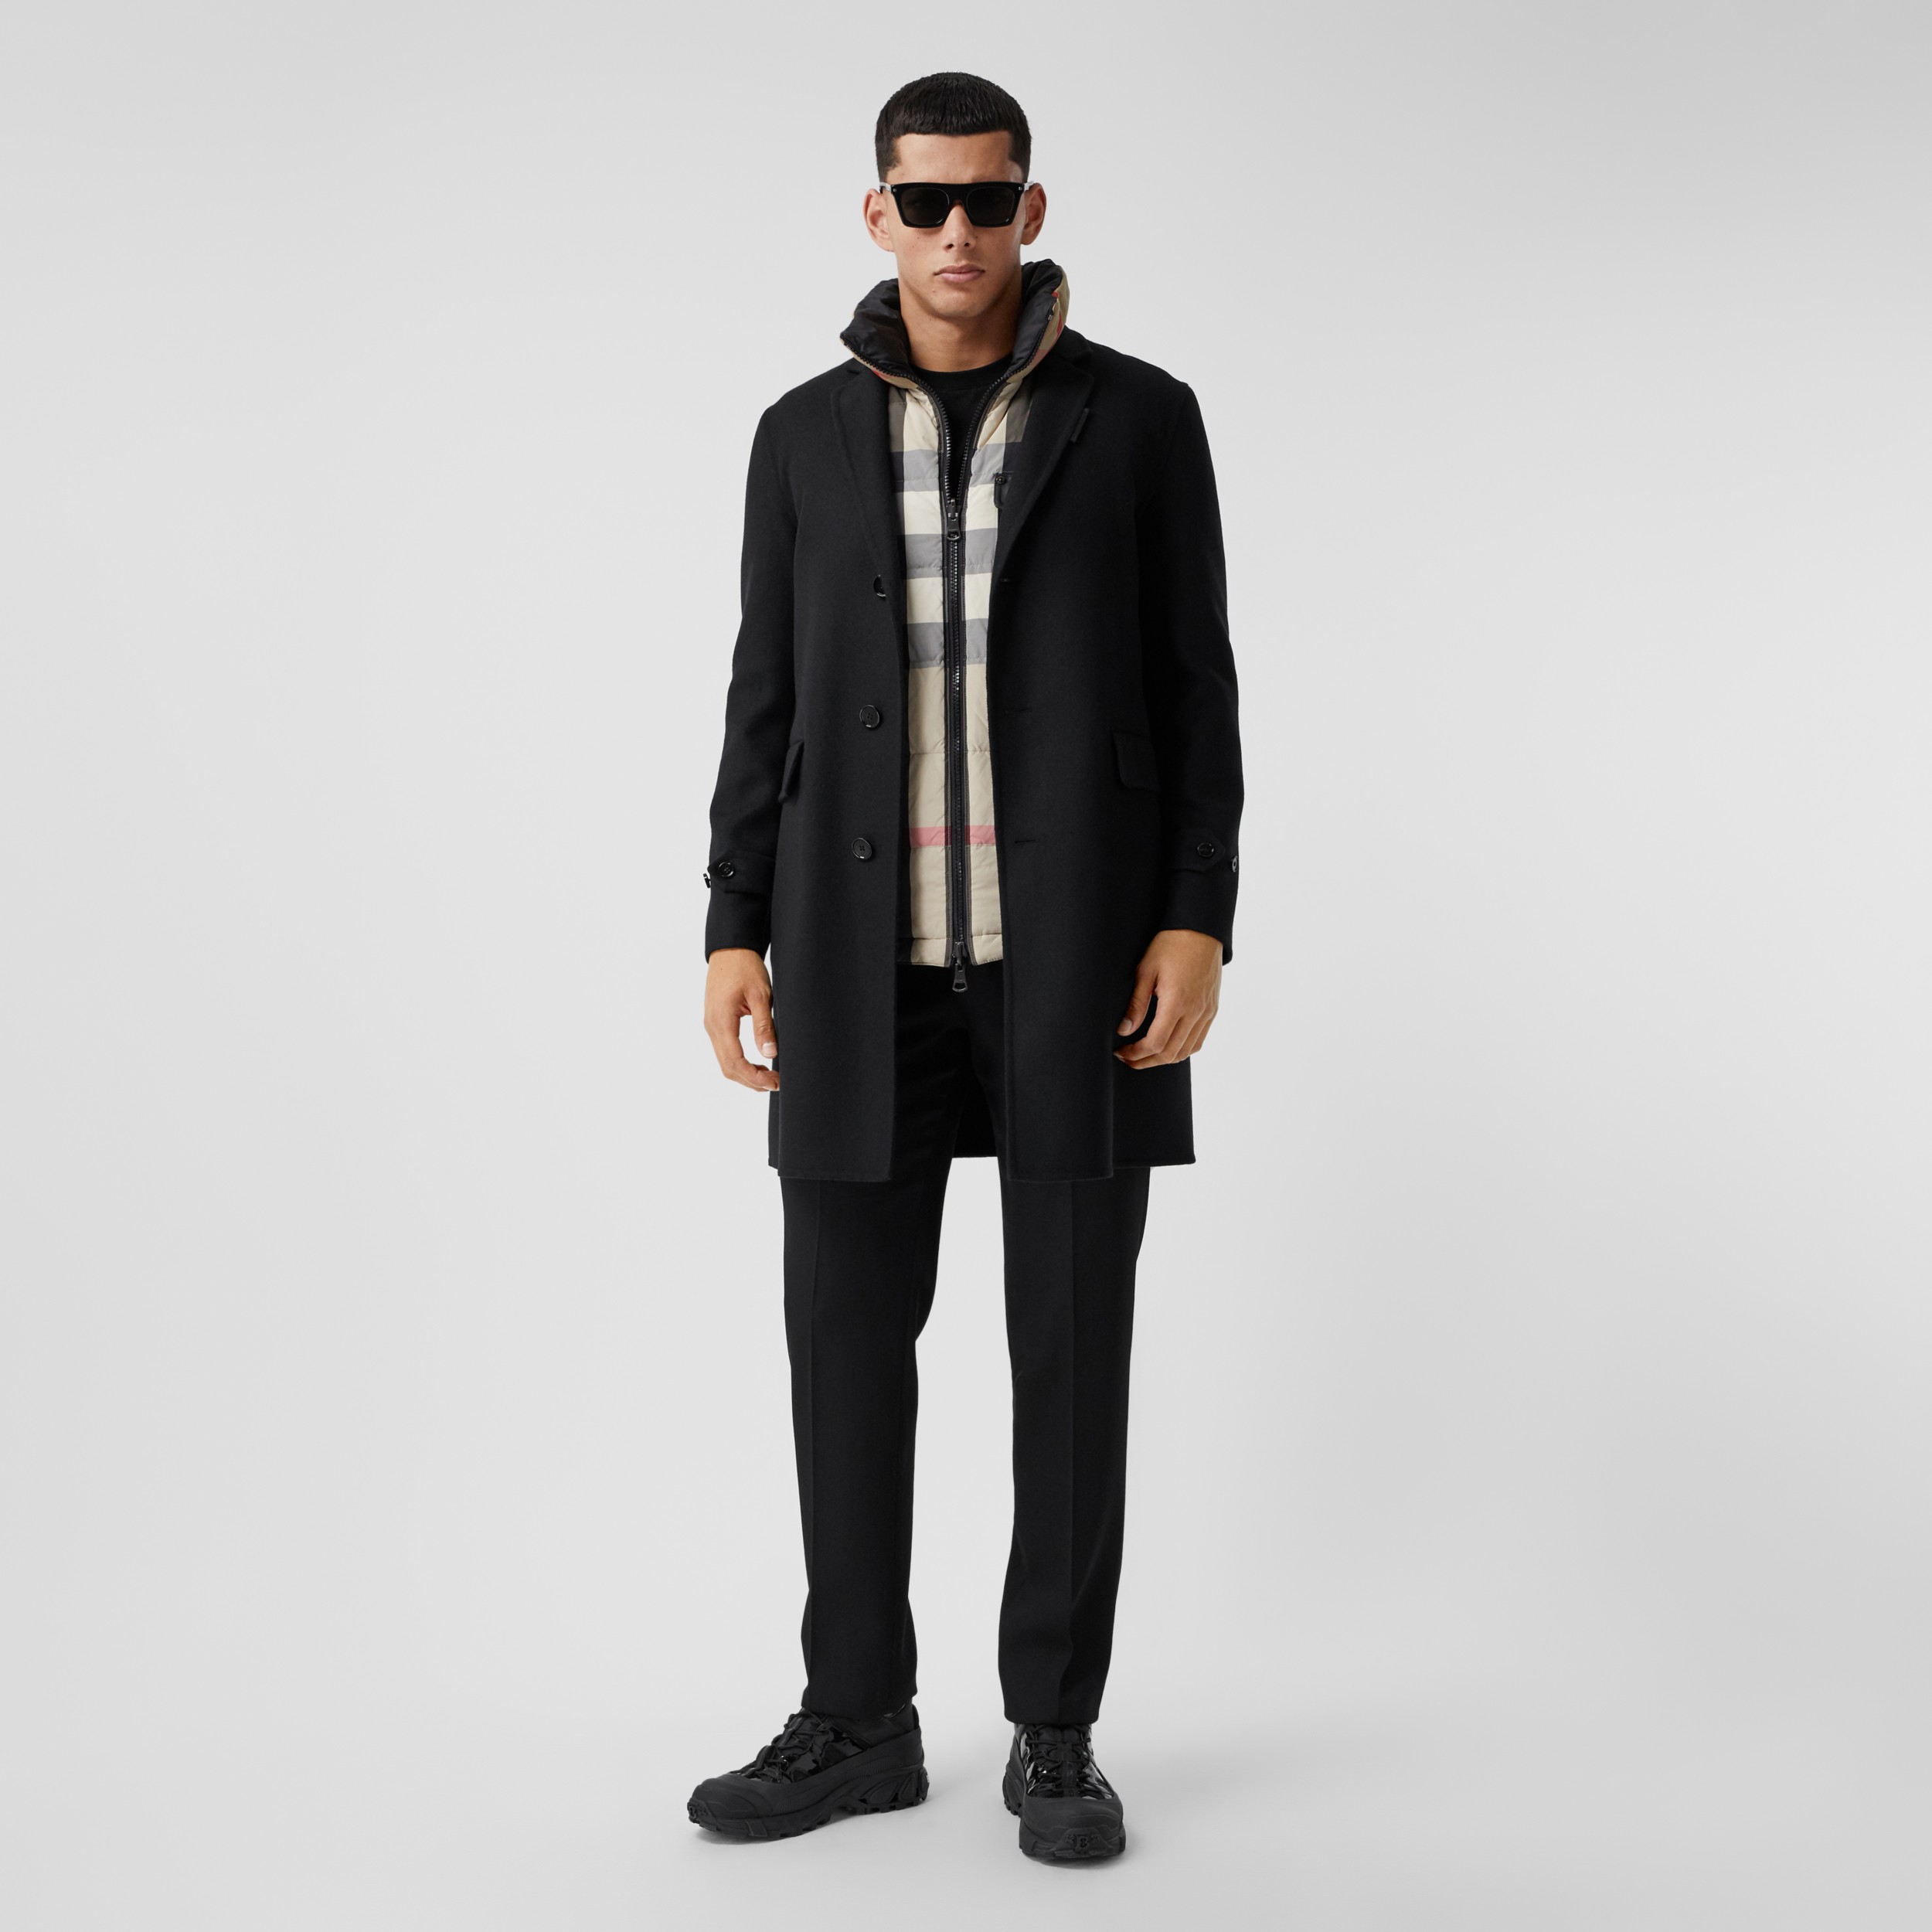 Wool Cashmere Lab Coat in Black - Men | Burberry United States